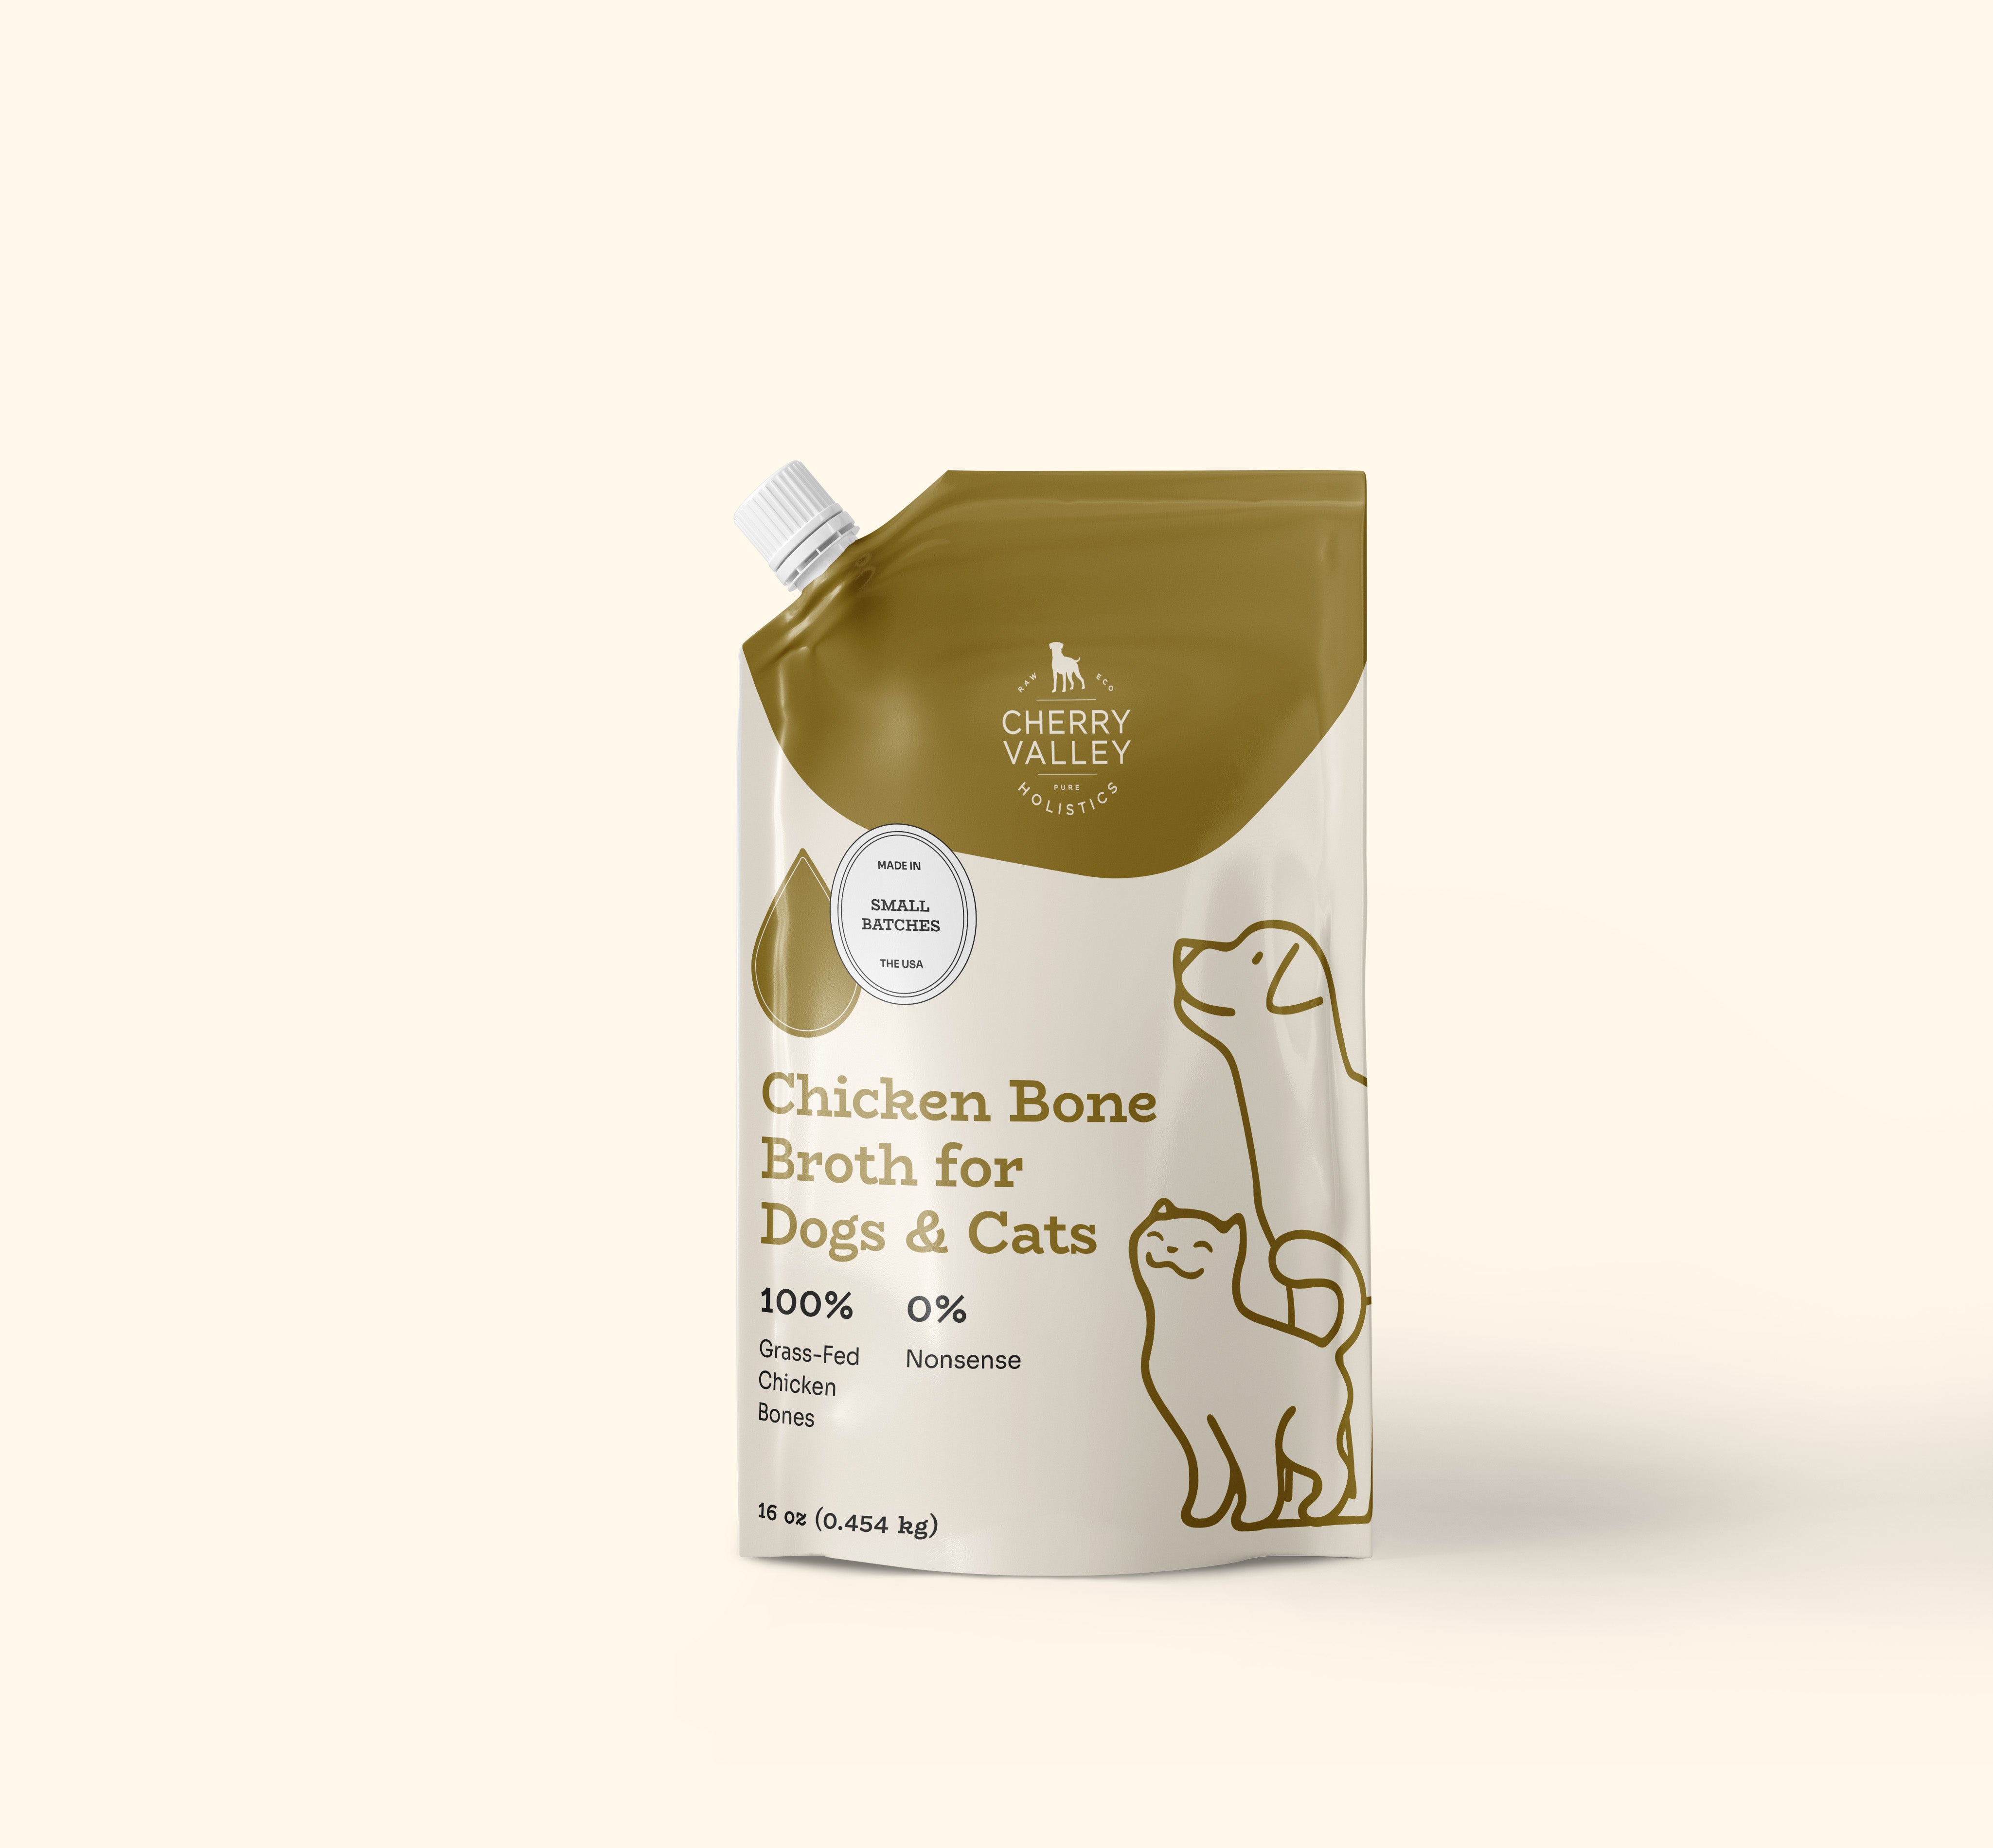 Chicken Bone Broth for Dogs & Cats